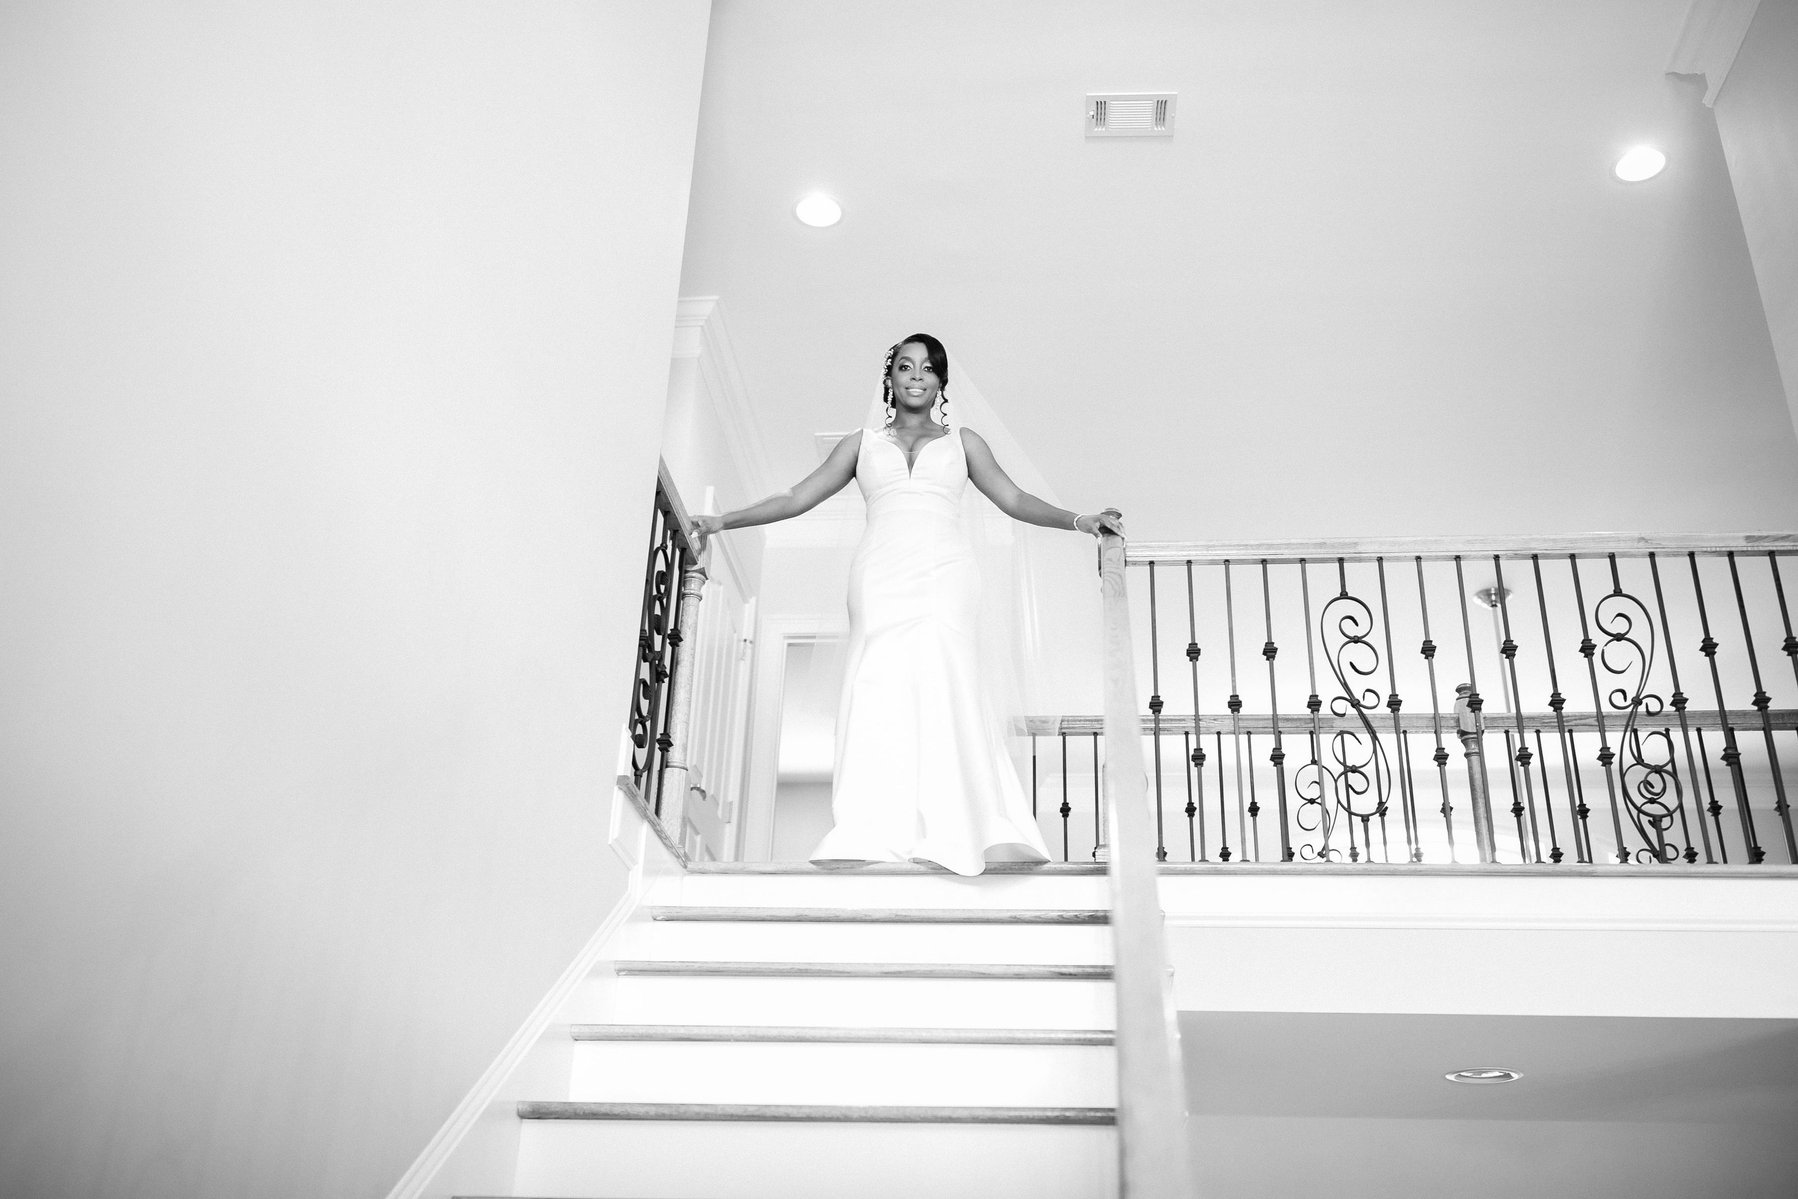 A Bride posing on Stairs